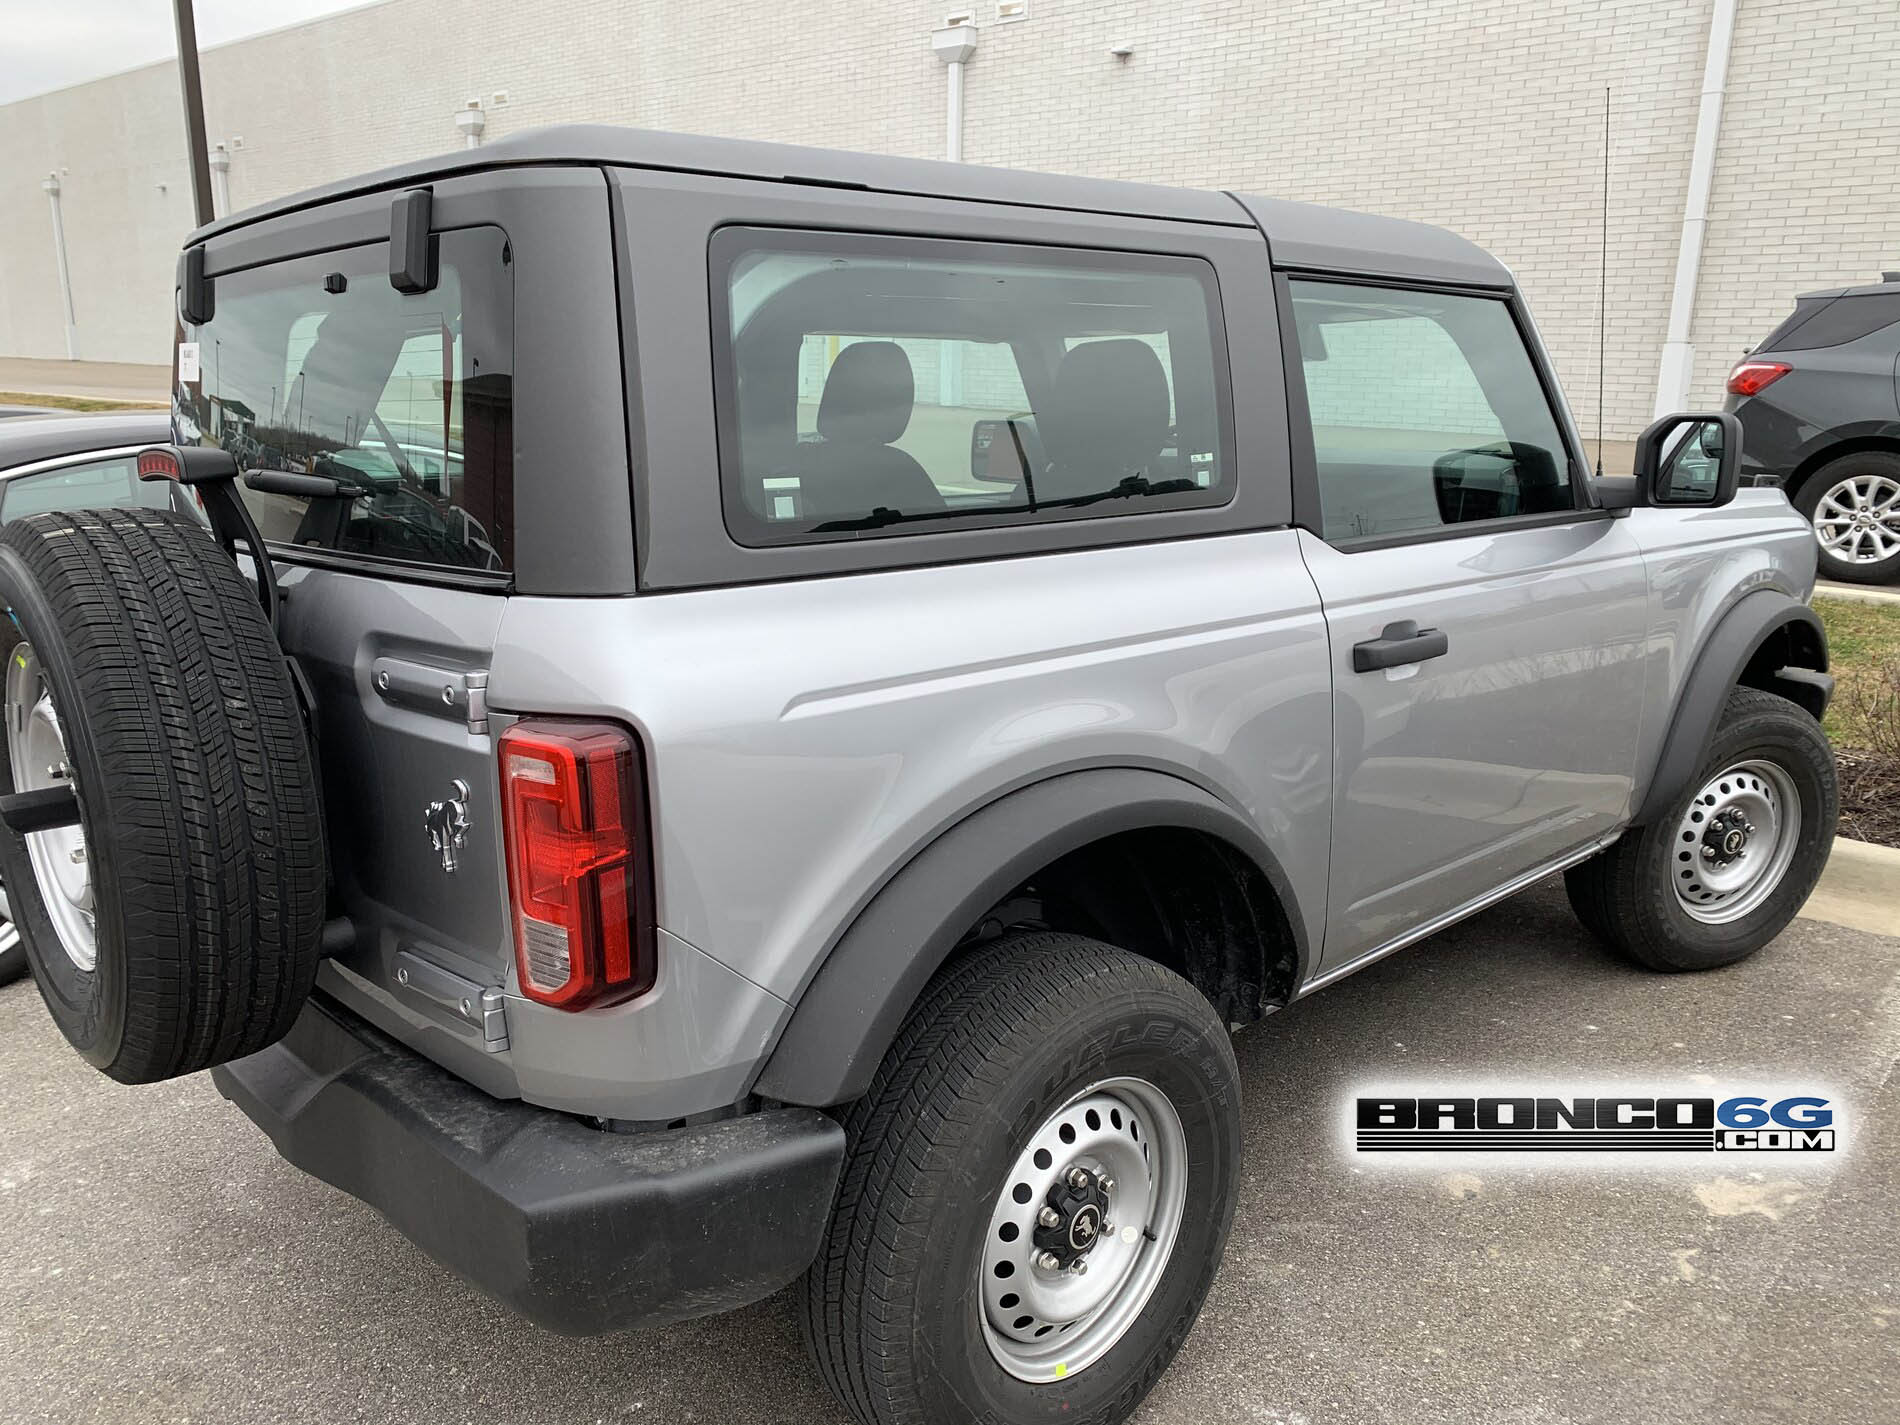 Ford Bronco Base Bronco 2-Door Iconic Silver spotted in  Wixom, MI 2-Door 2021 Bronco Base Steel Wheels in Iconic Silver 2